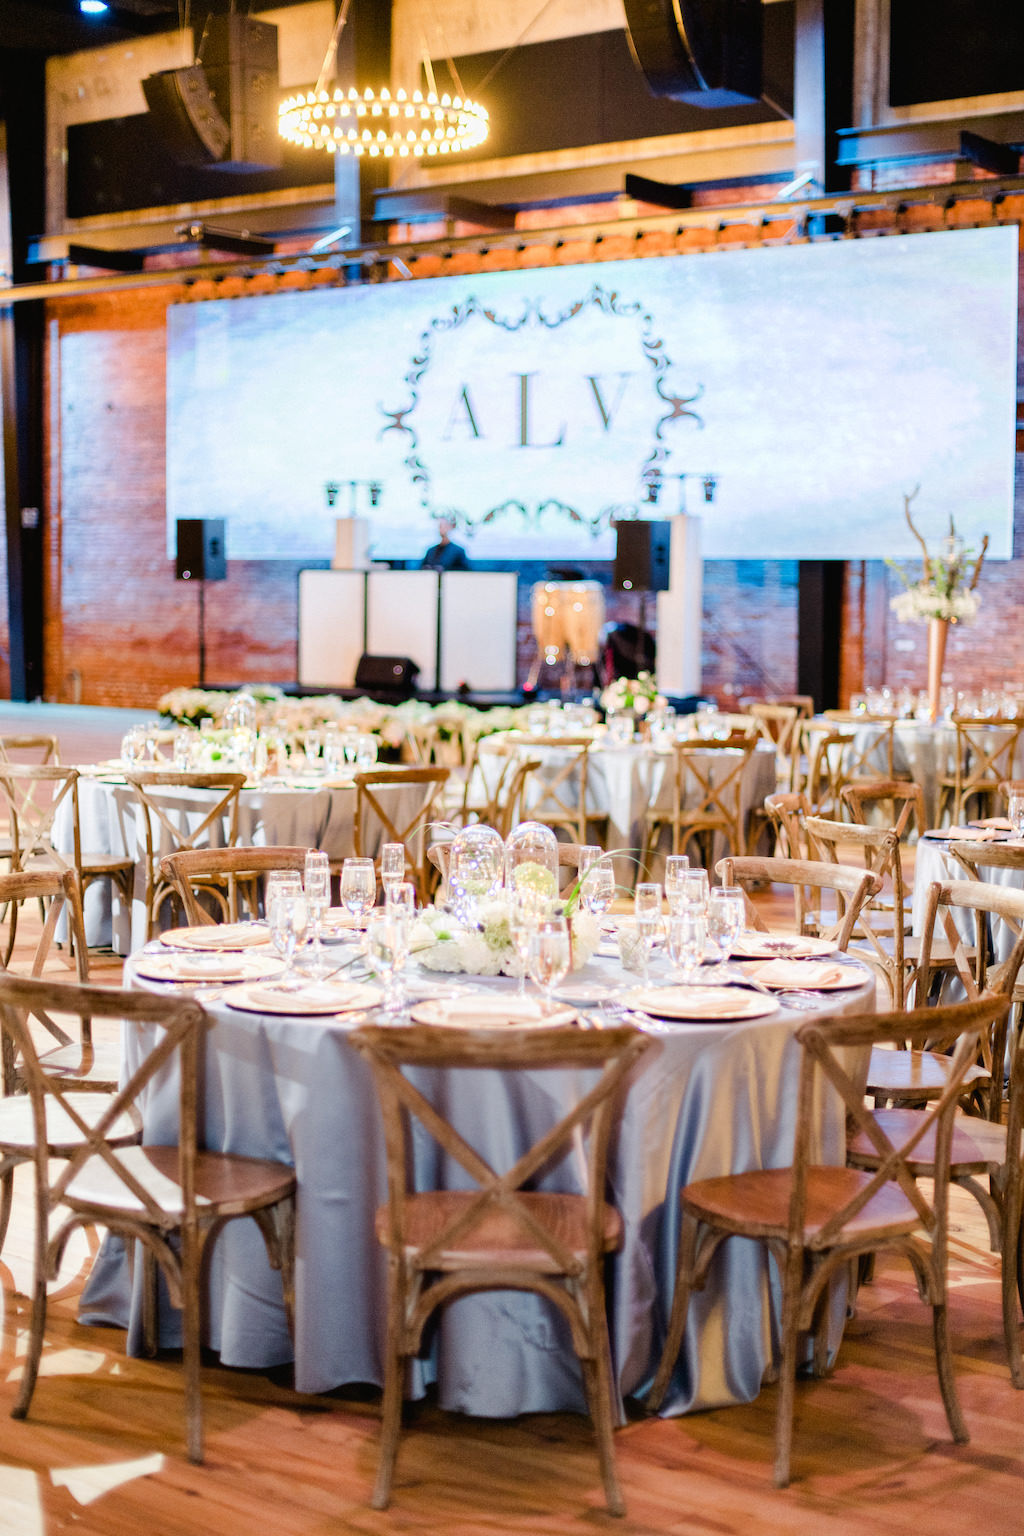 Wedding Reception Deco, Round Tables with Dusty Blue Tablecloths, Wooden Chiavari Chairs, Projector Screen with Monogram Initials | Historic Industrial Tampa Bay Wedding Venue Armature Works